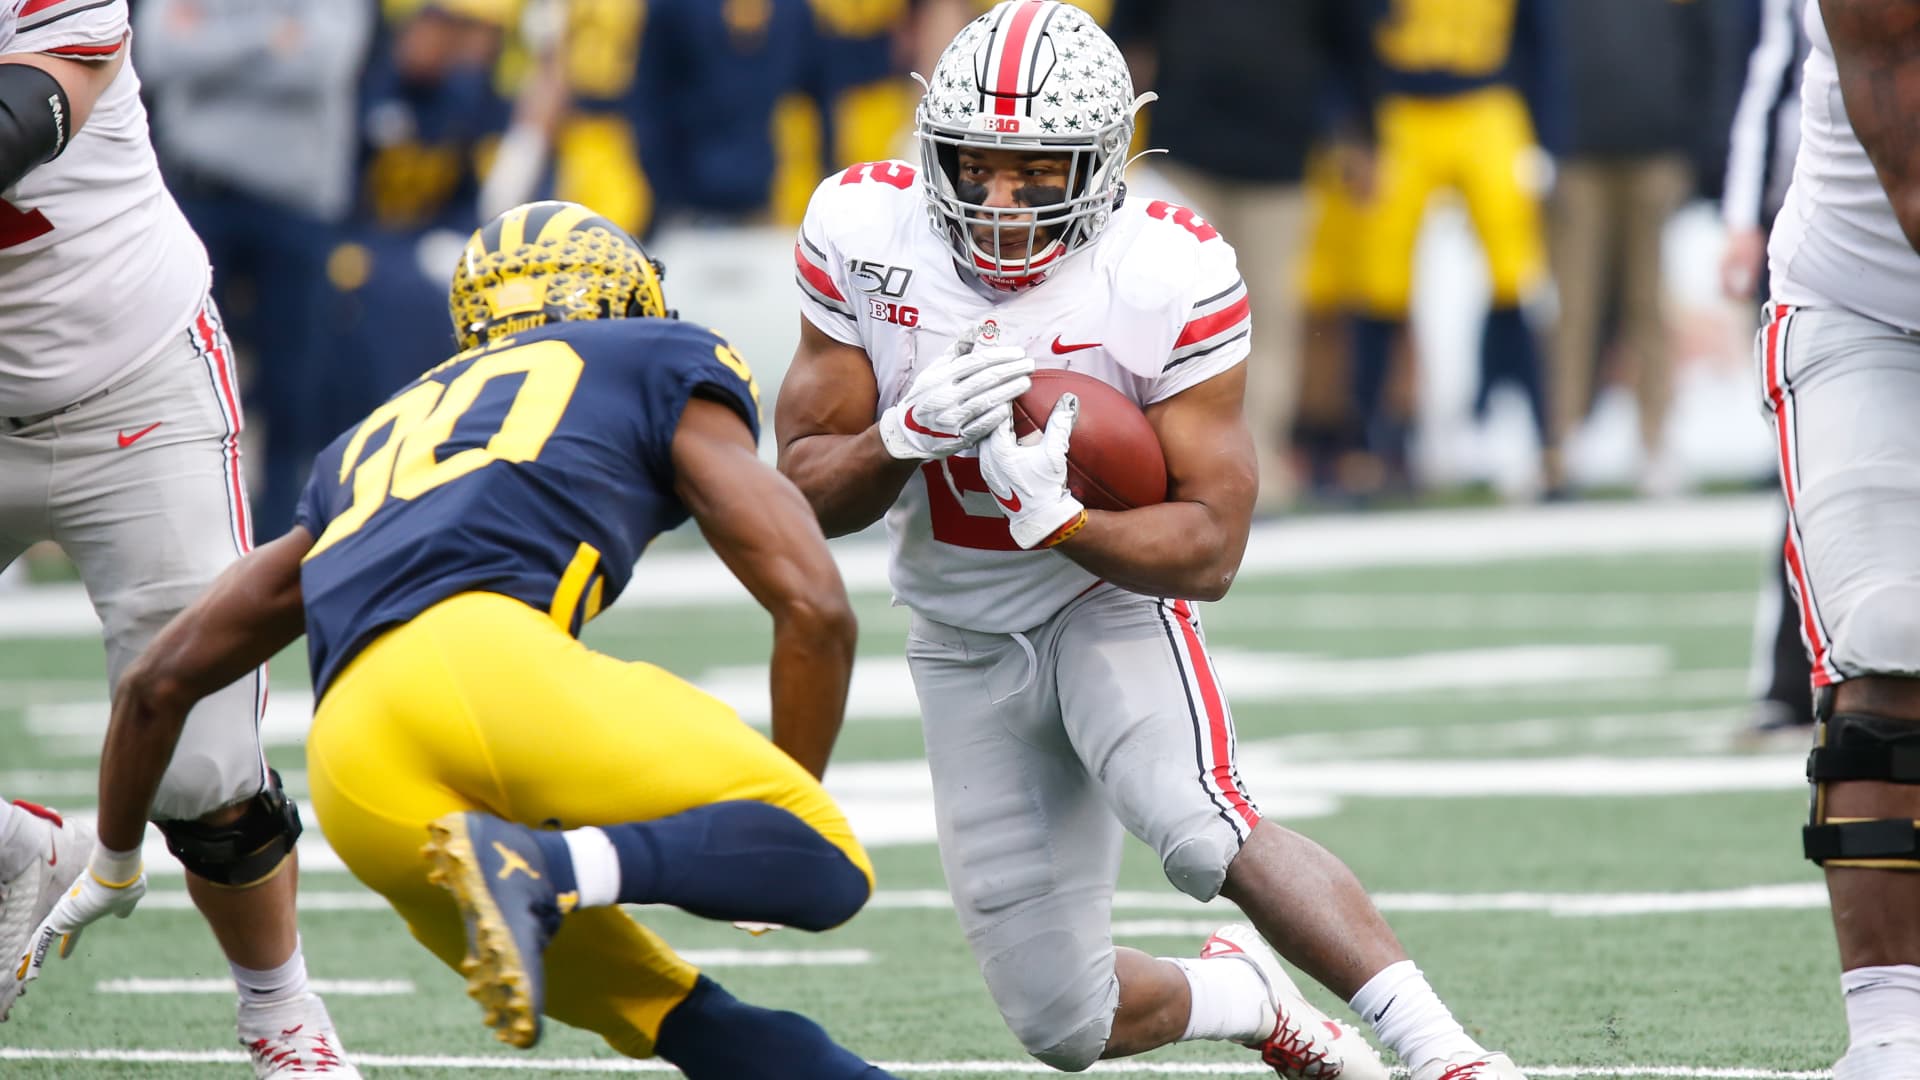 Ohio State Buckeyes running back J.K. Dobbins (2) runs with the ball while trying to avoid being tackled by Michigan Wolverines defensive back Daxton Hill (30) during a regular season Big 10 Conference game between the Ohio State Buckeyes (2) and the Michigan Wolverines.